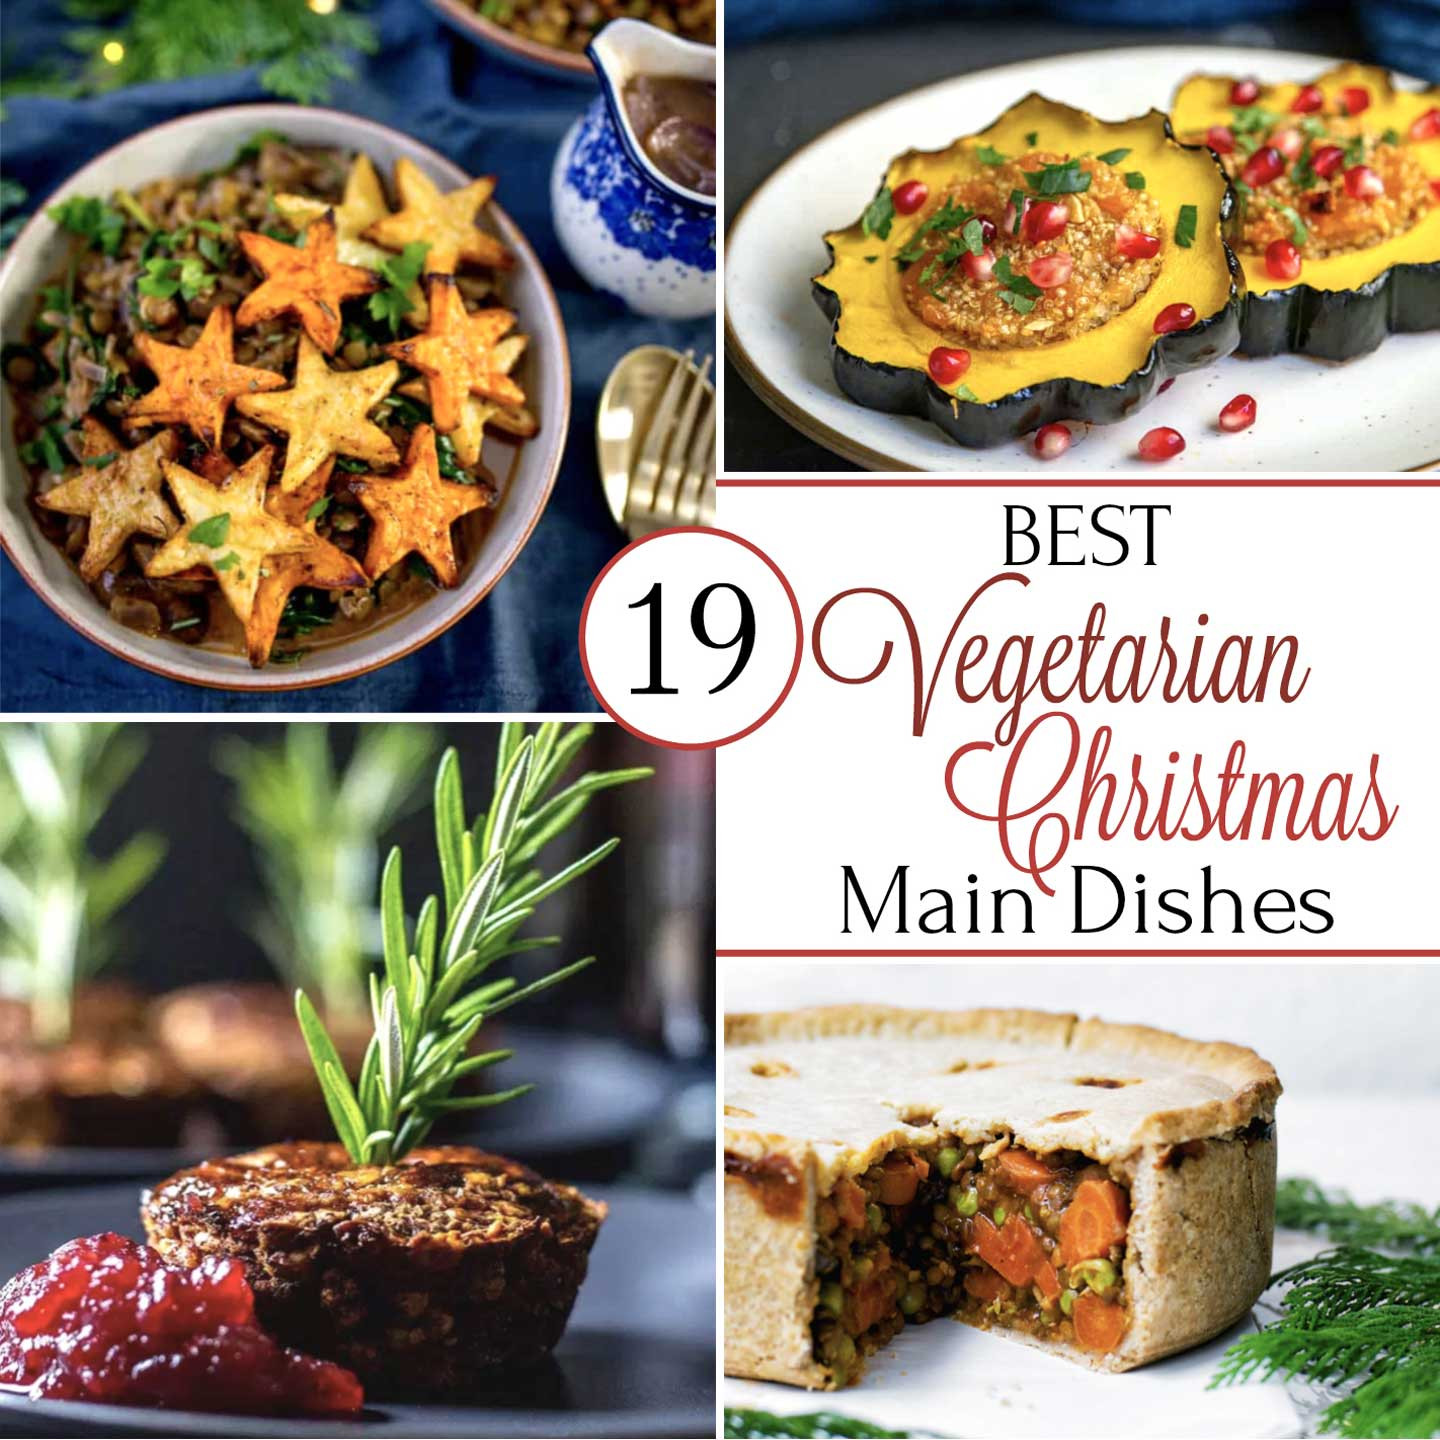 Holiday Vegetarian Main Dishes
 19 Best Christmas Ve arian Main Dish Recipes Two